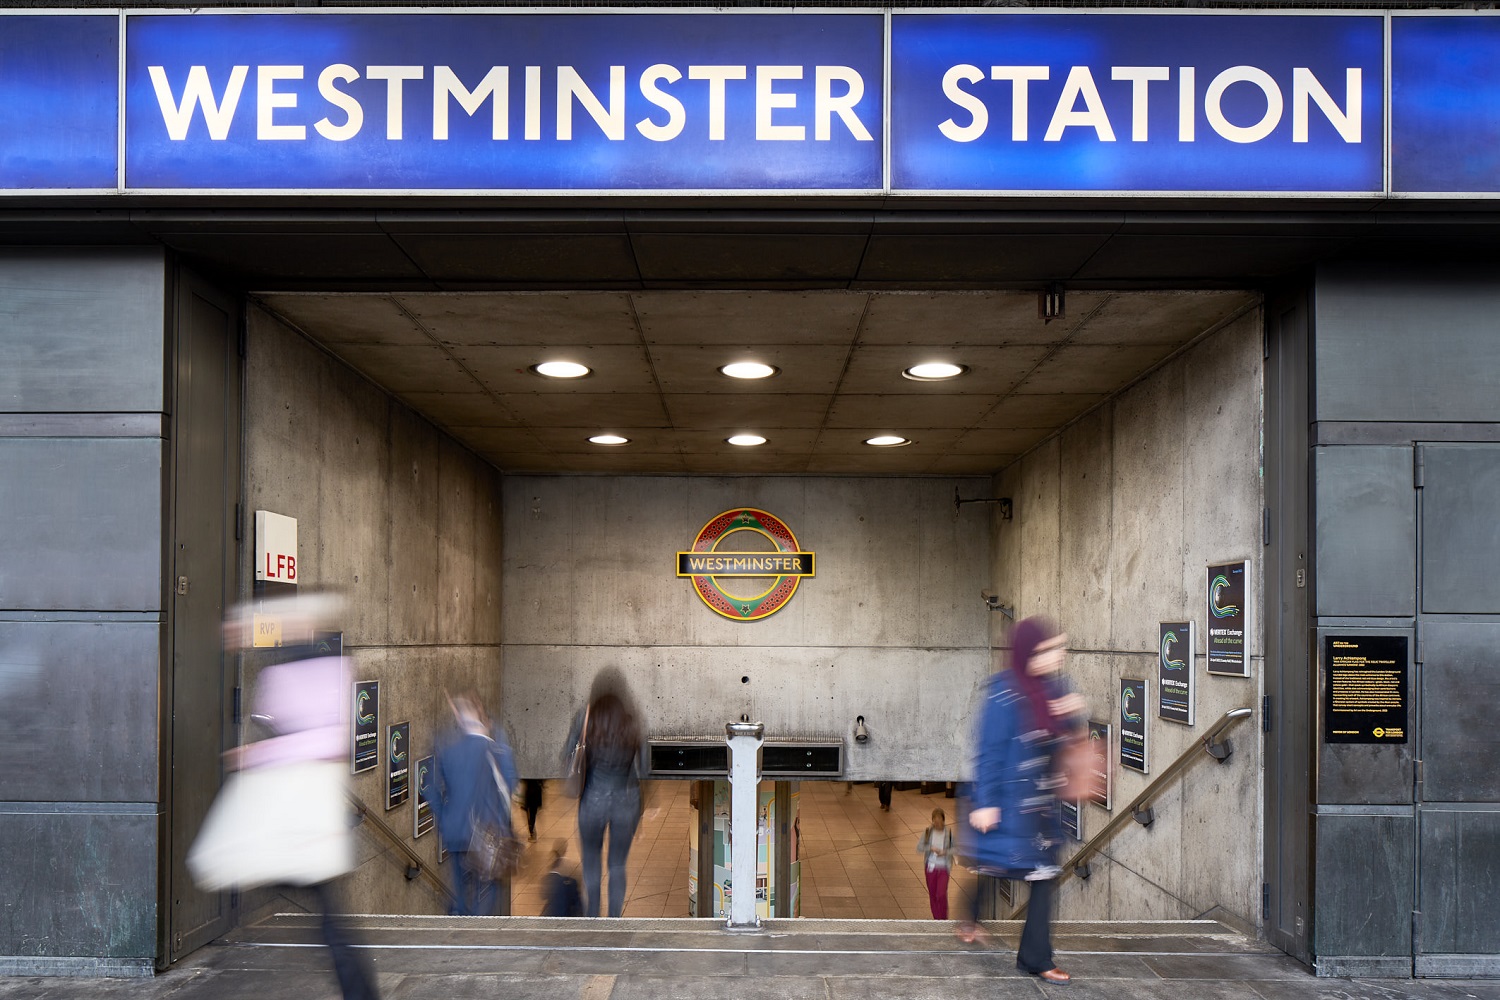 The entrance to Westminster Underground station